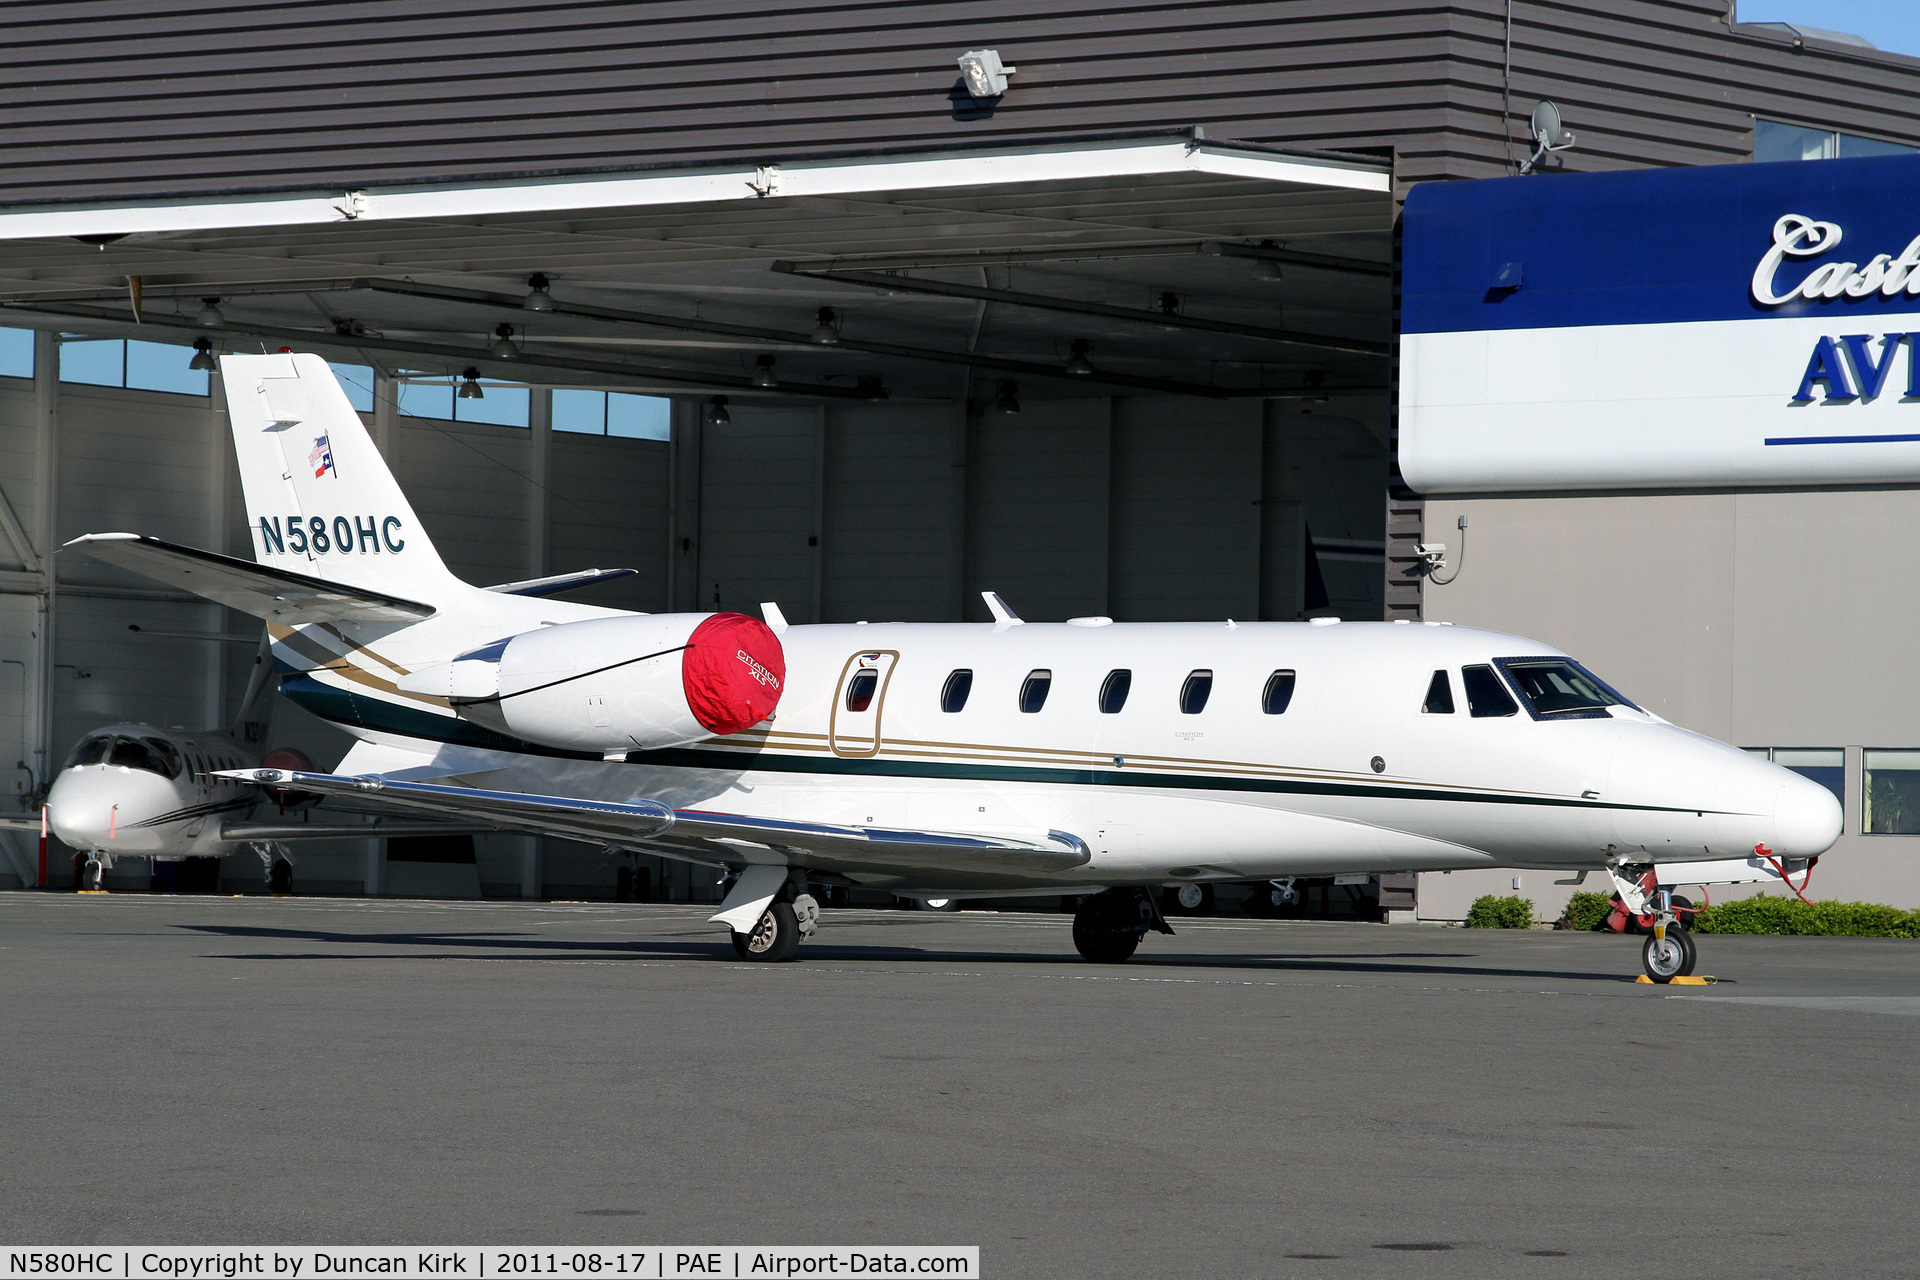 N580HC, 2007 Cessna 560XL C/N 560-5707, Up from Texas